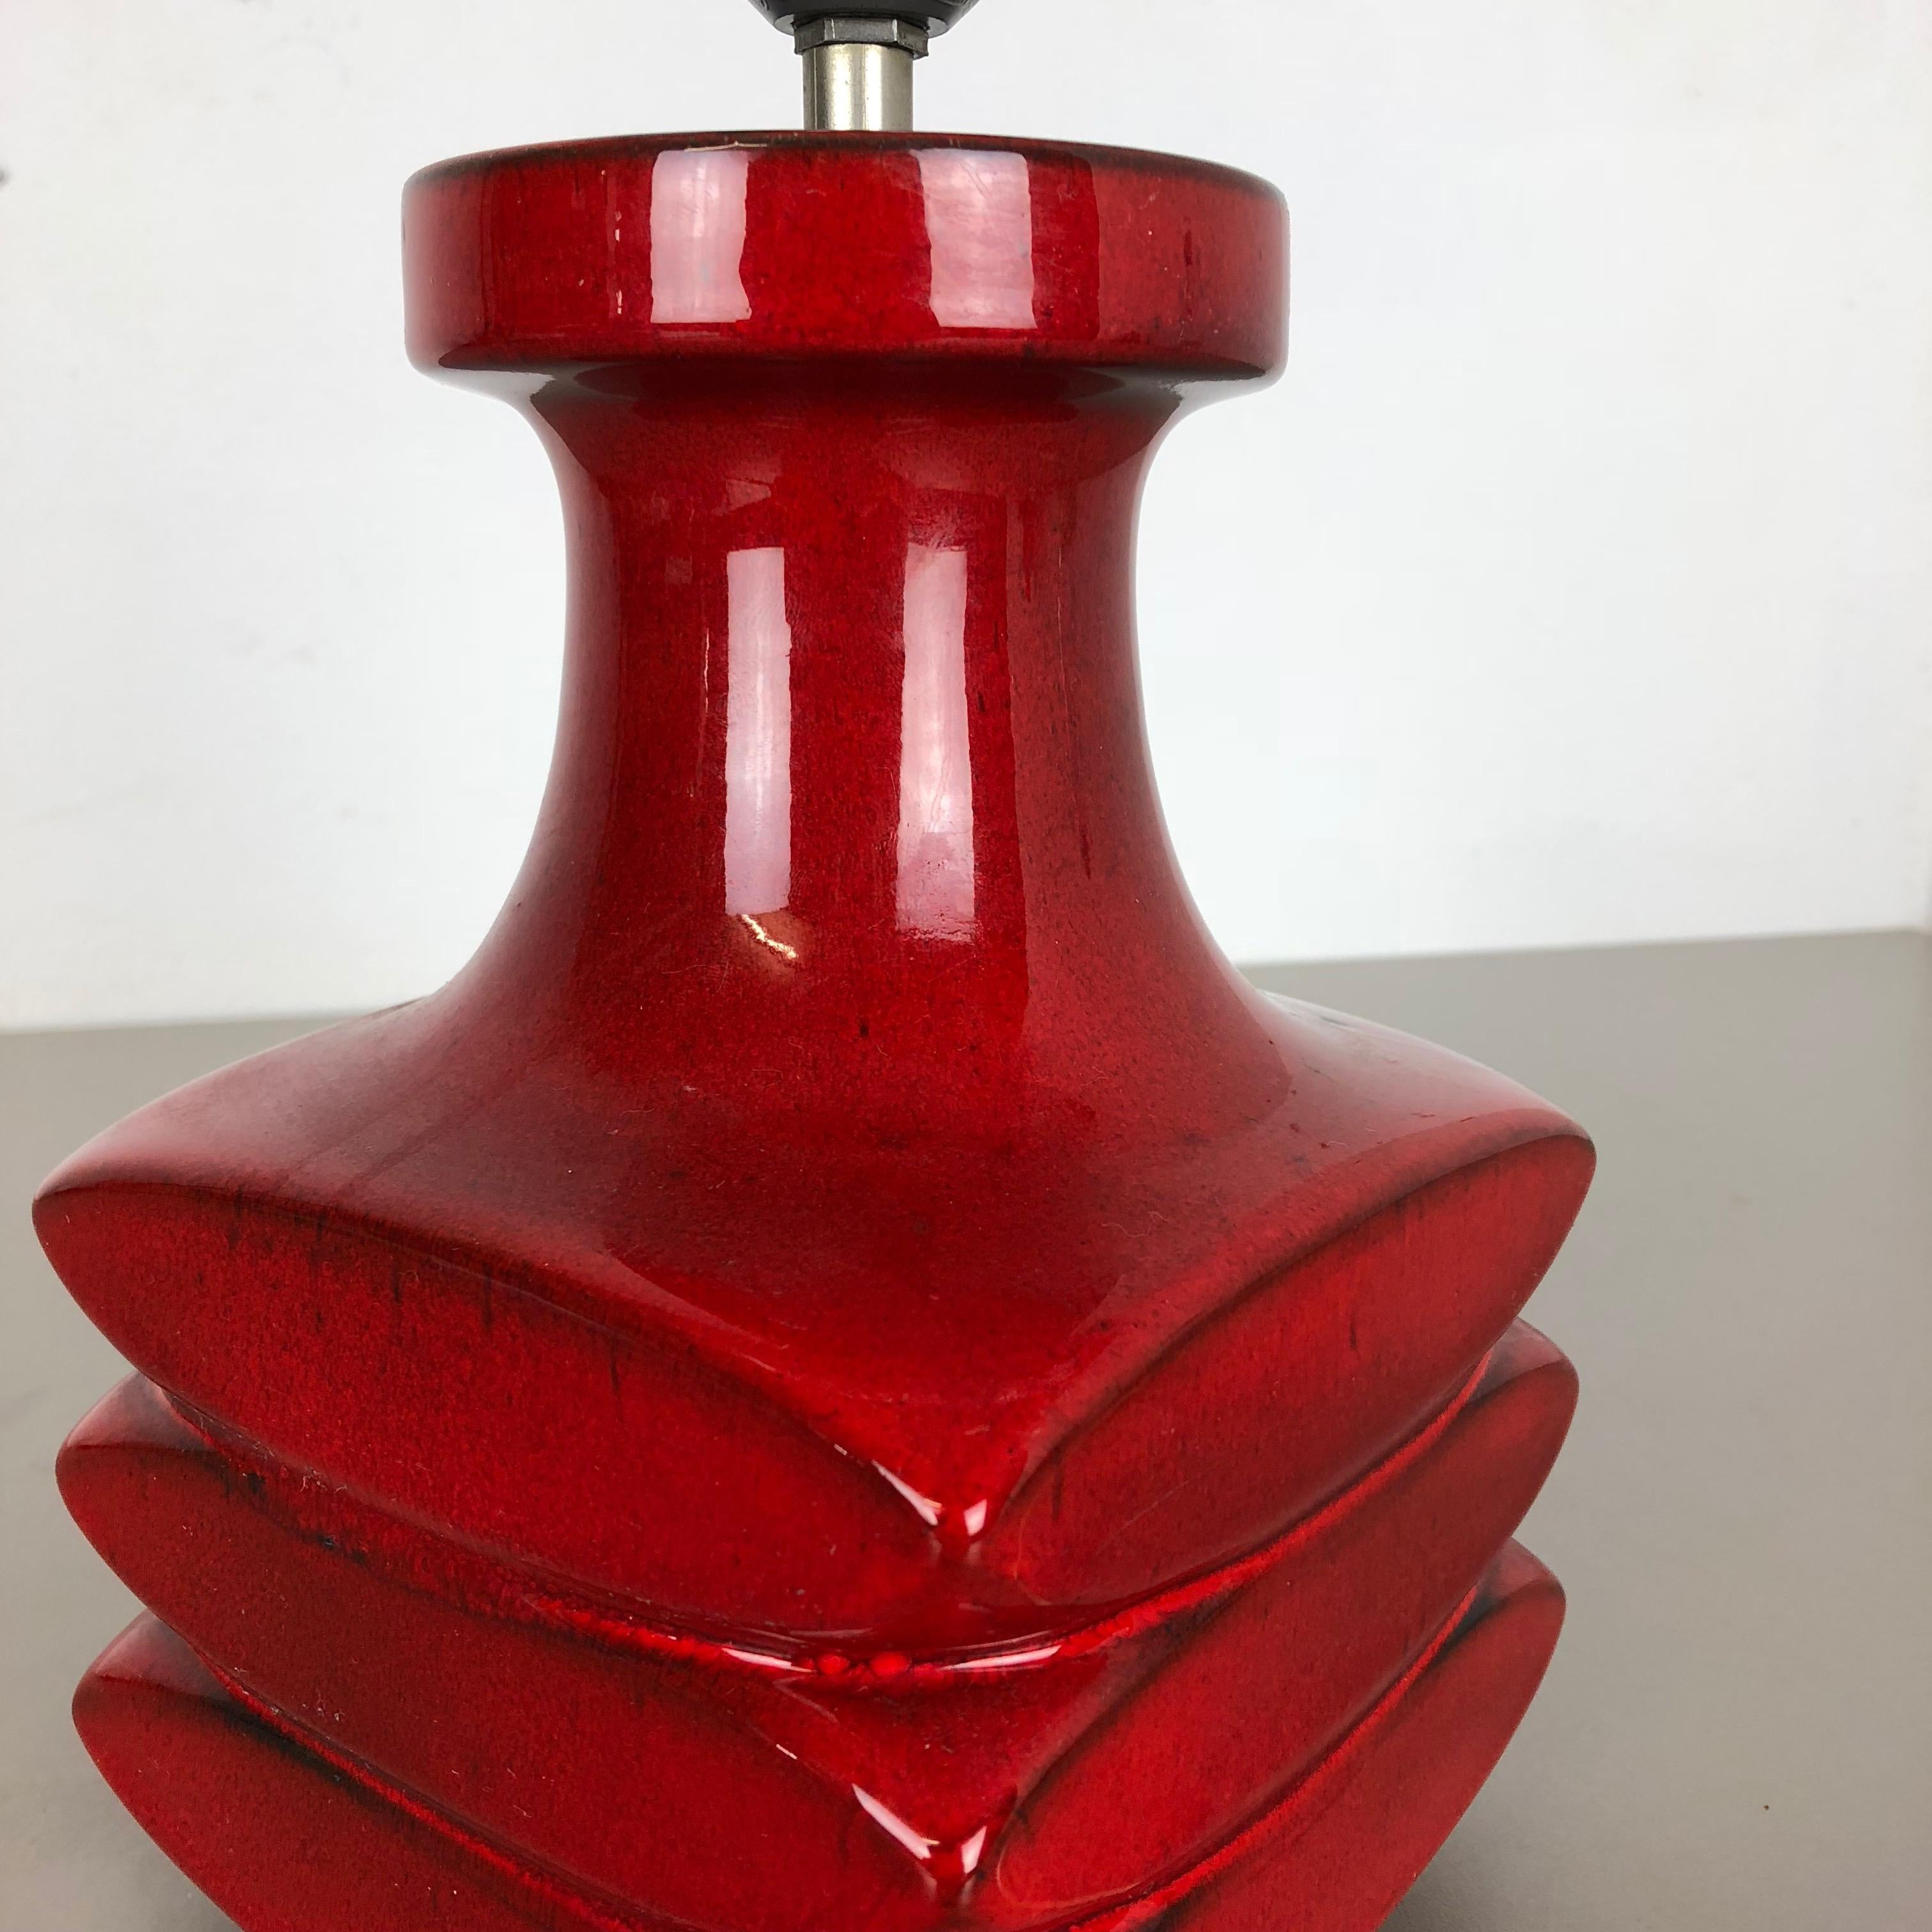 Red Ceramic Studio Pottery Table Light by Cari Zalloni for Fohr, Germany 1970s For Sale 1